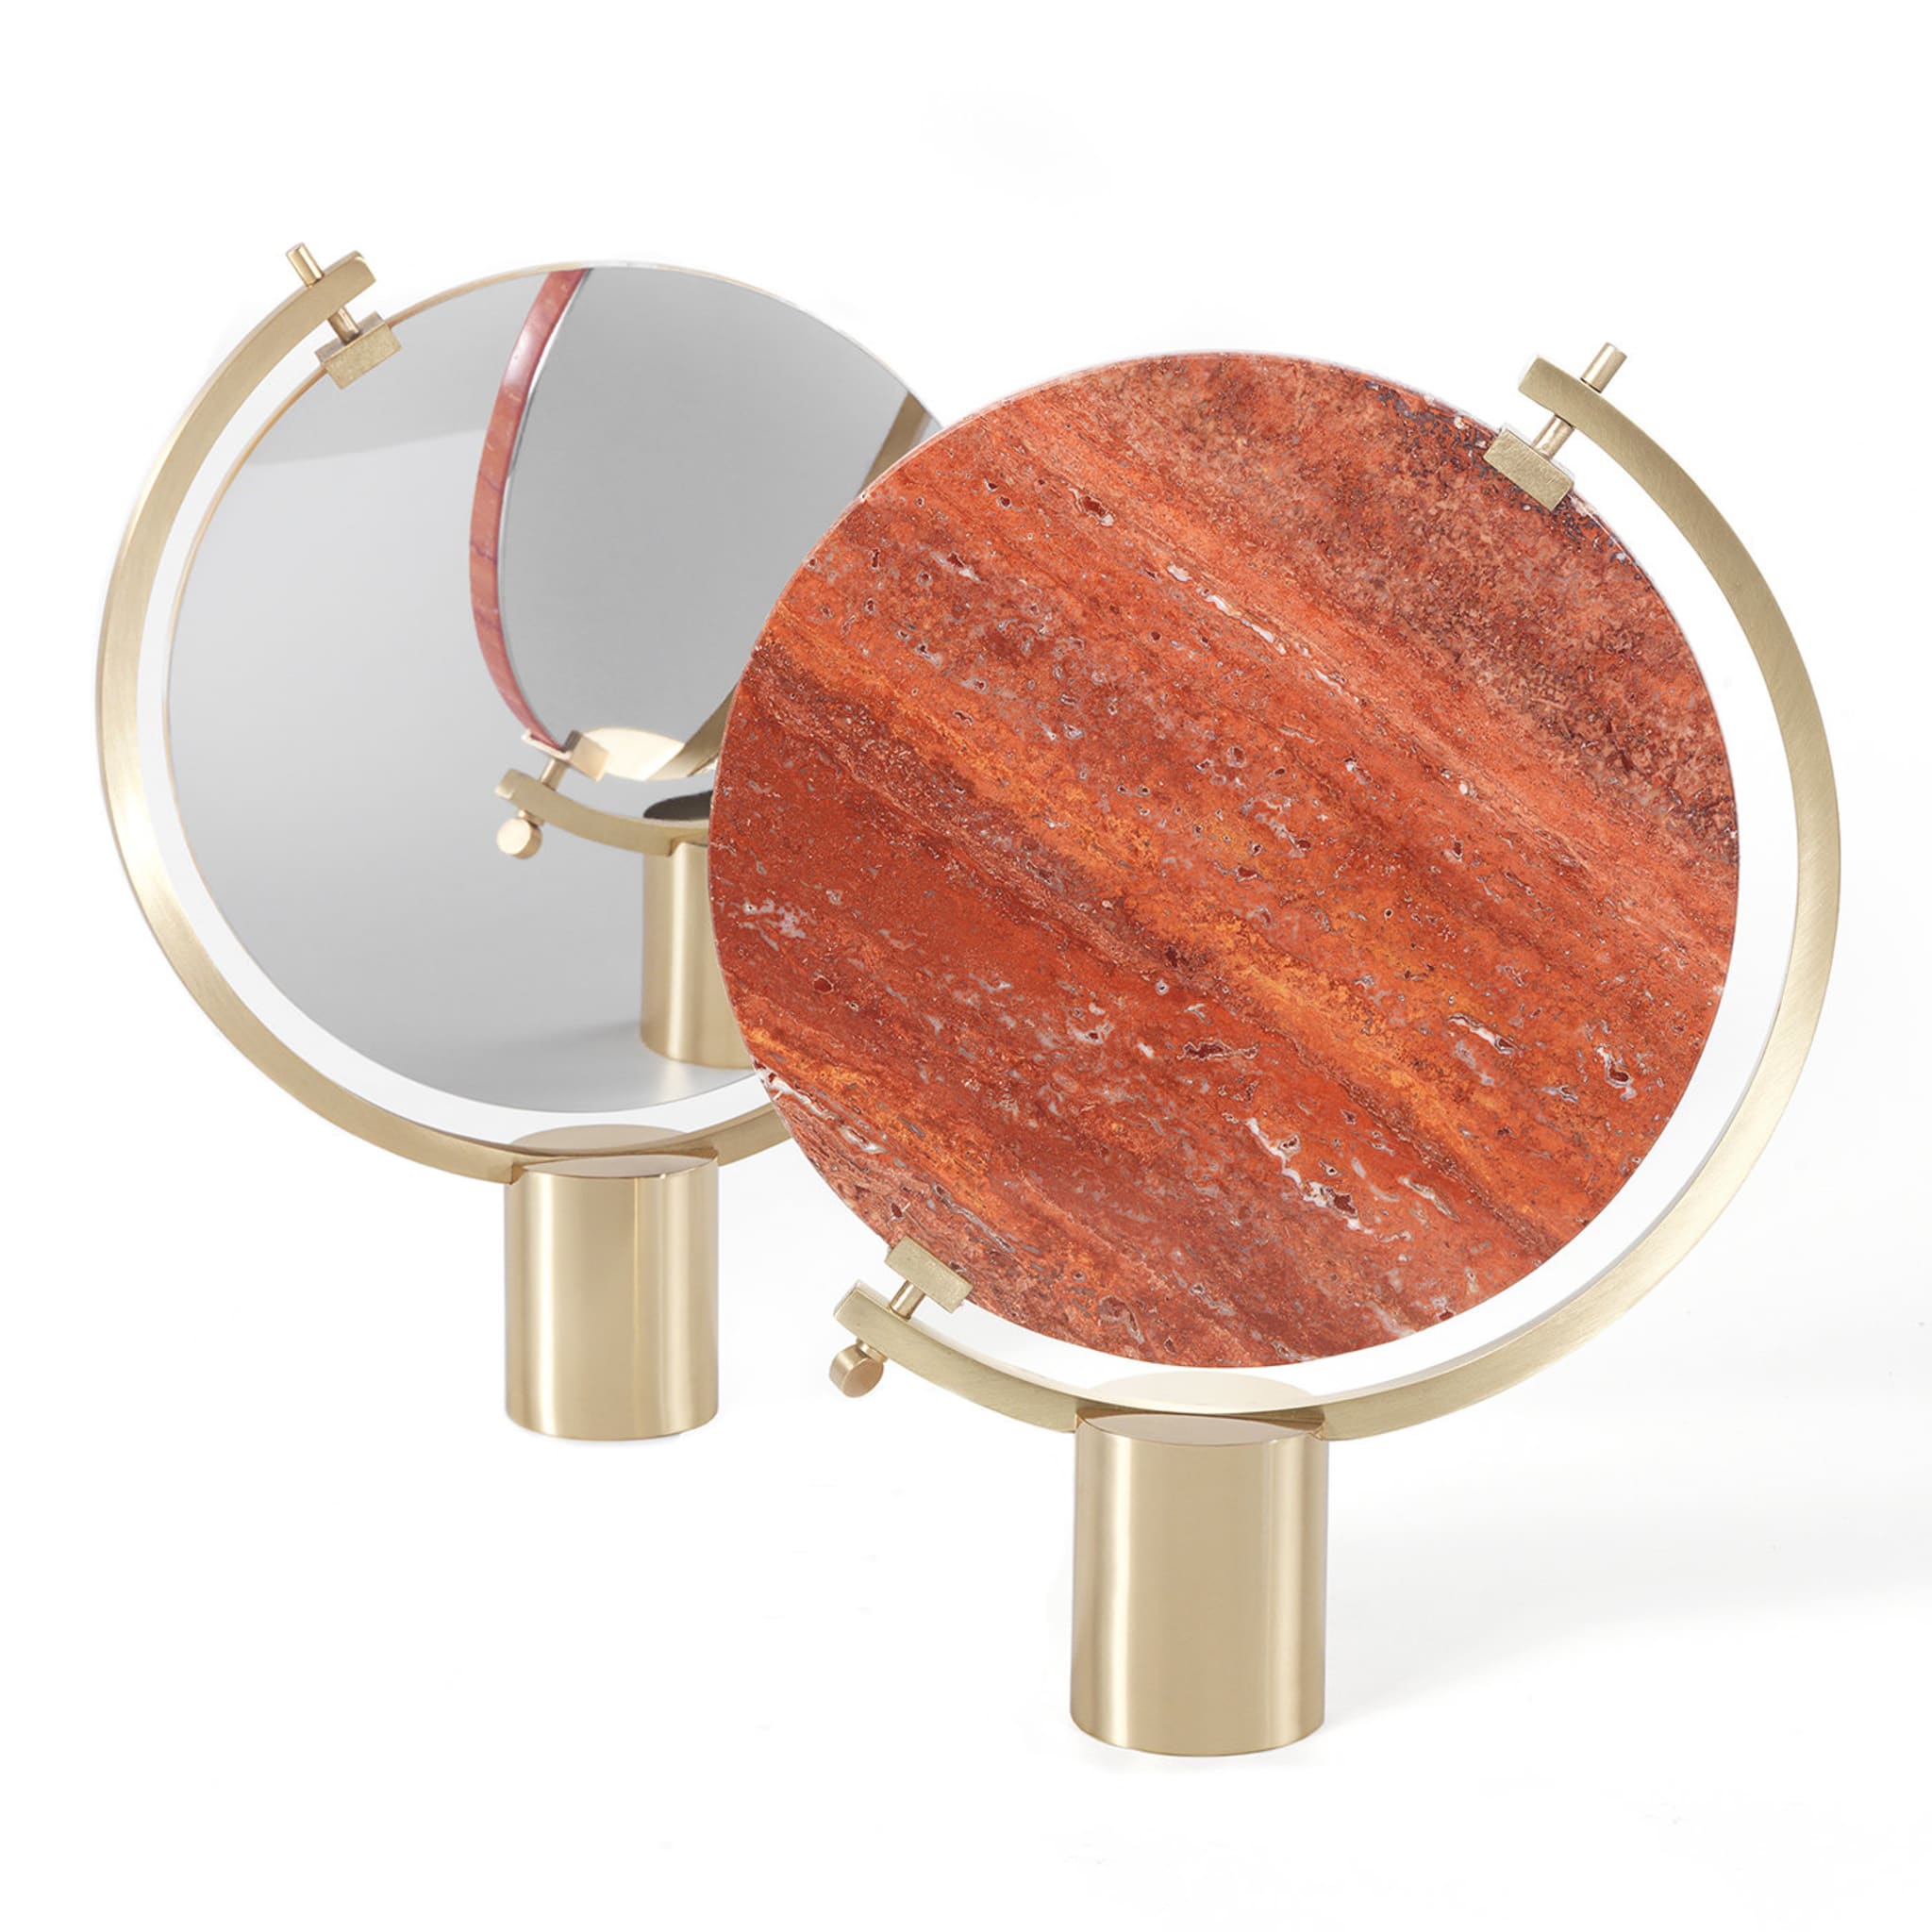 Naia Tabletop Mirror in Red Travertine Marble by CTRLZAK - Alternative view 2